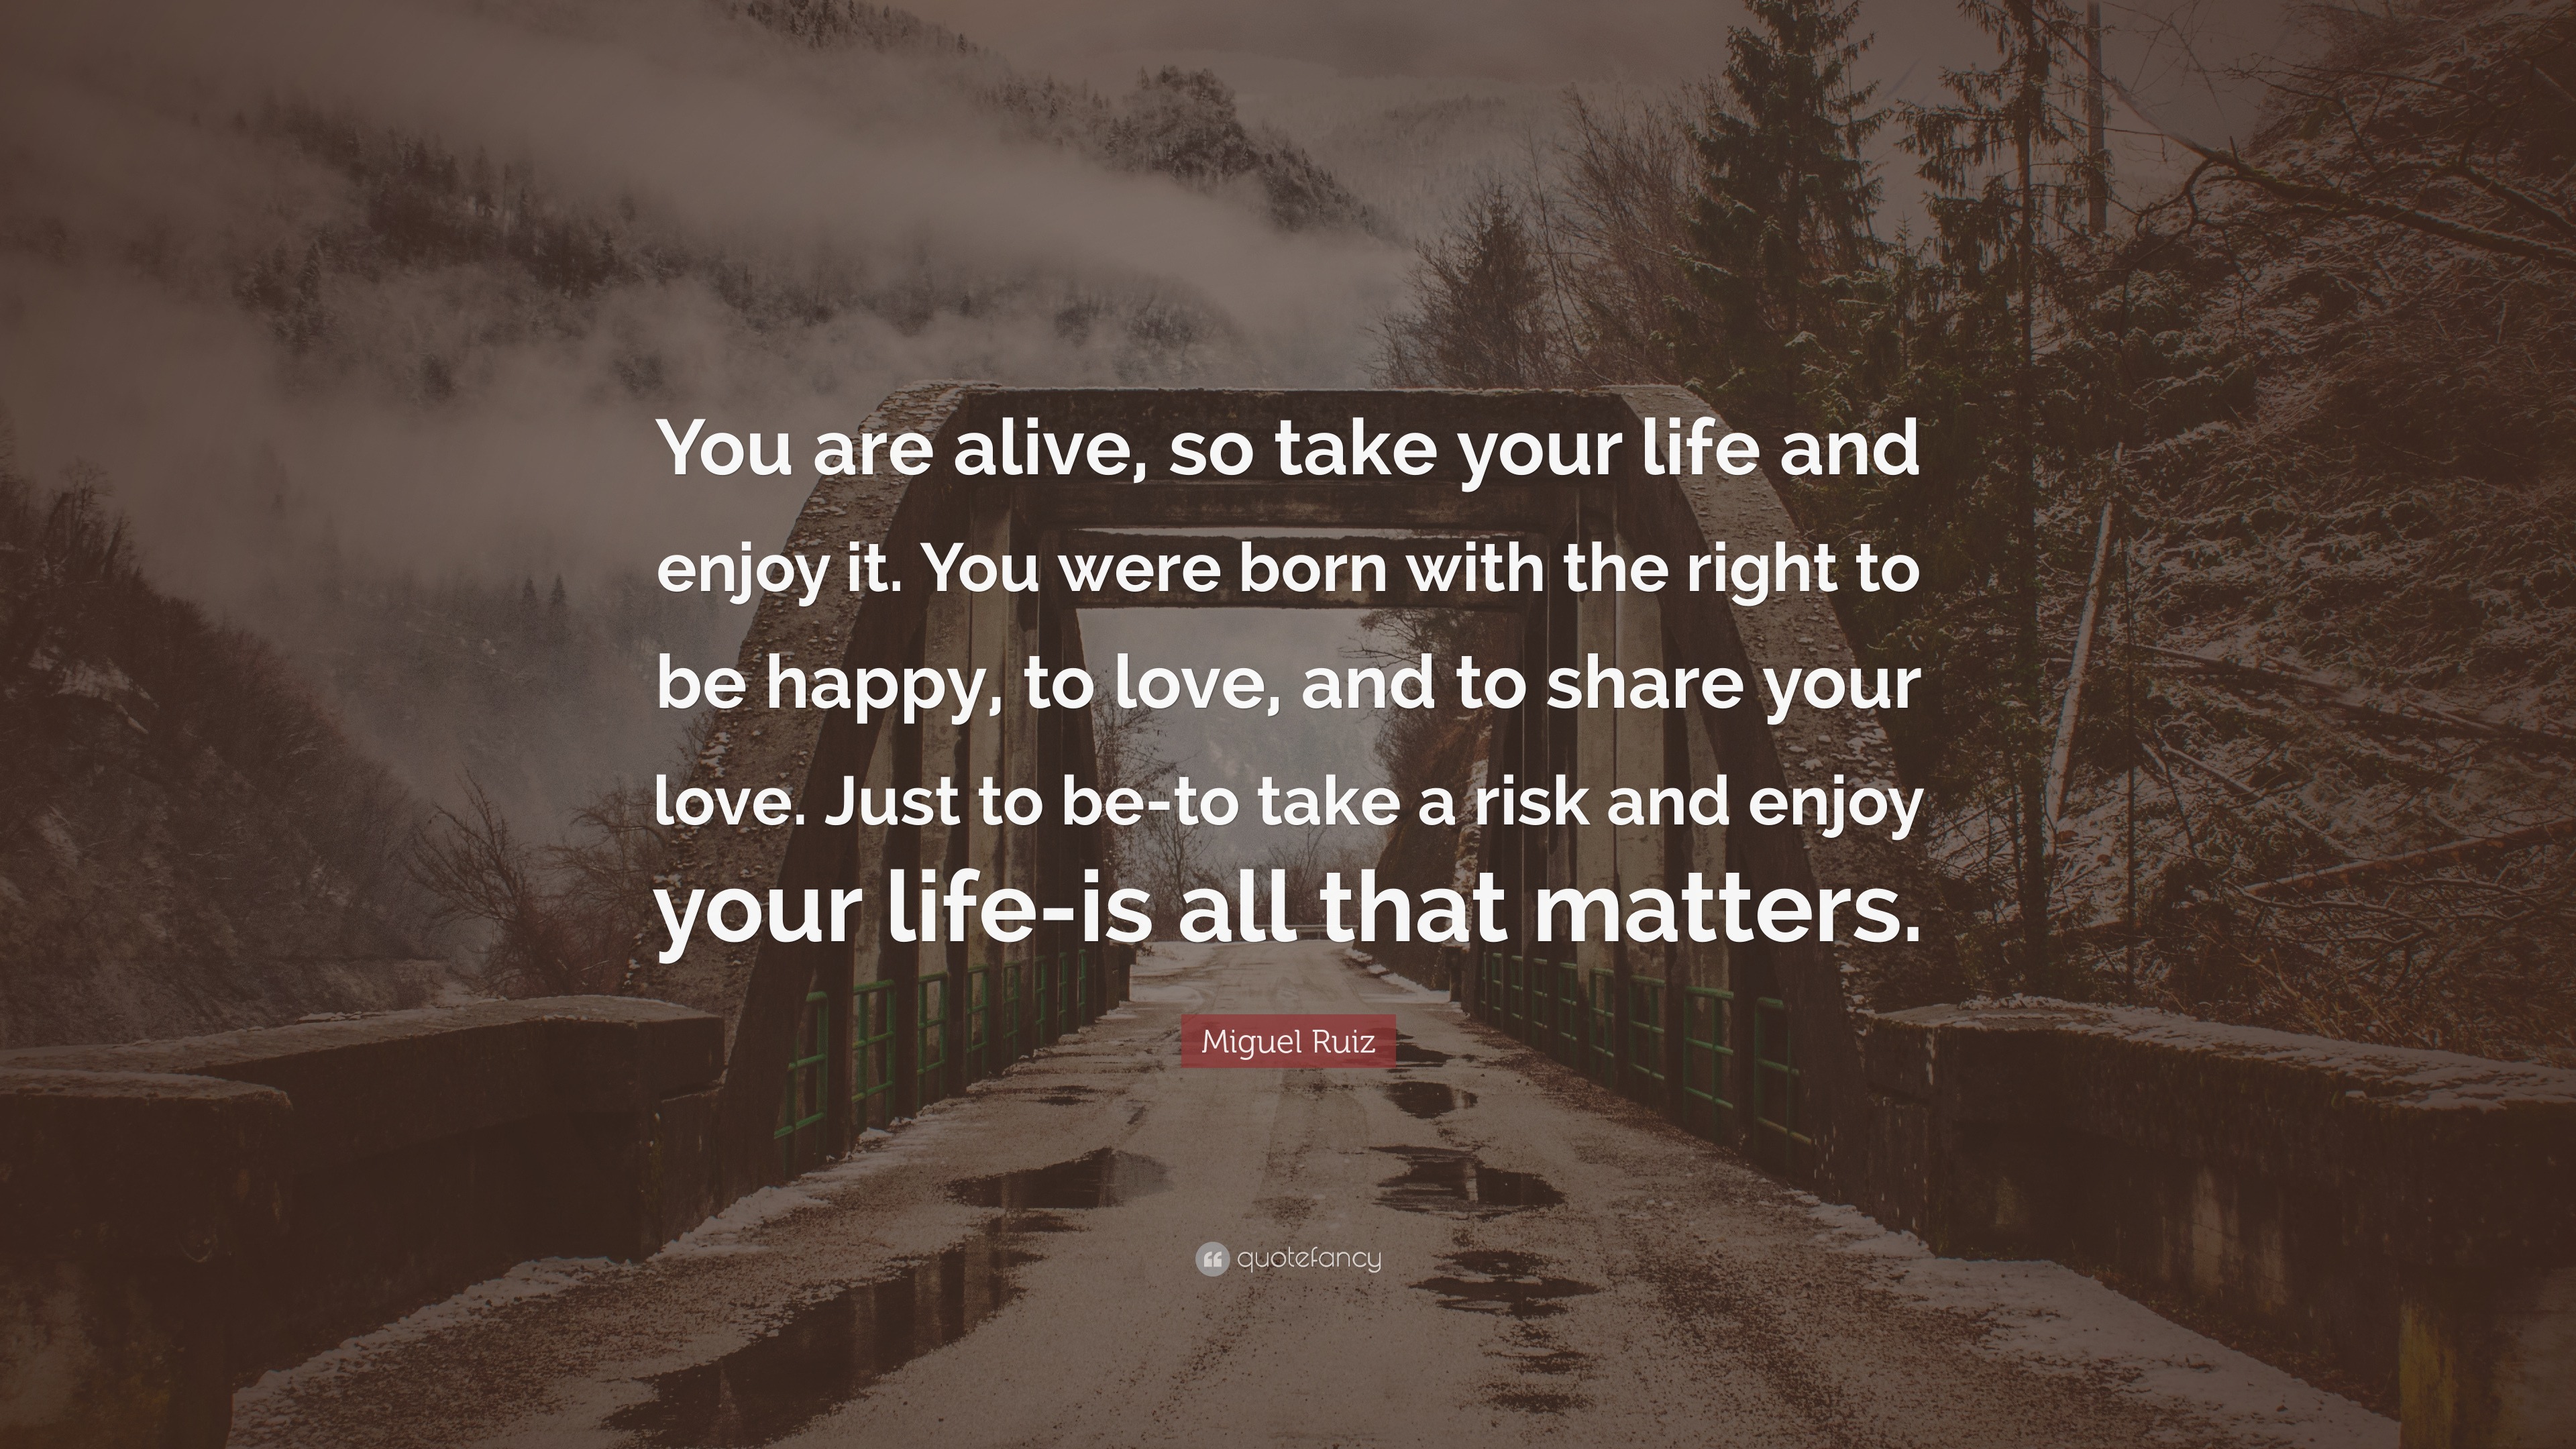 Miguel Ruiz Quote “You are alive so take your life and enjoy it